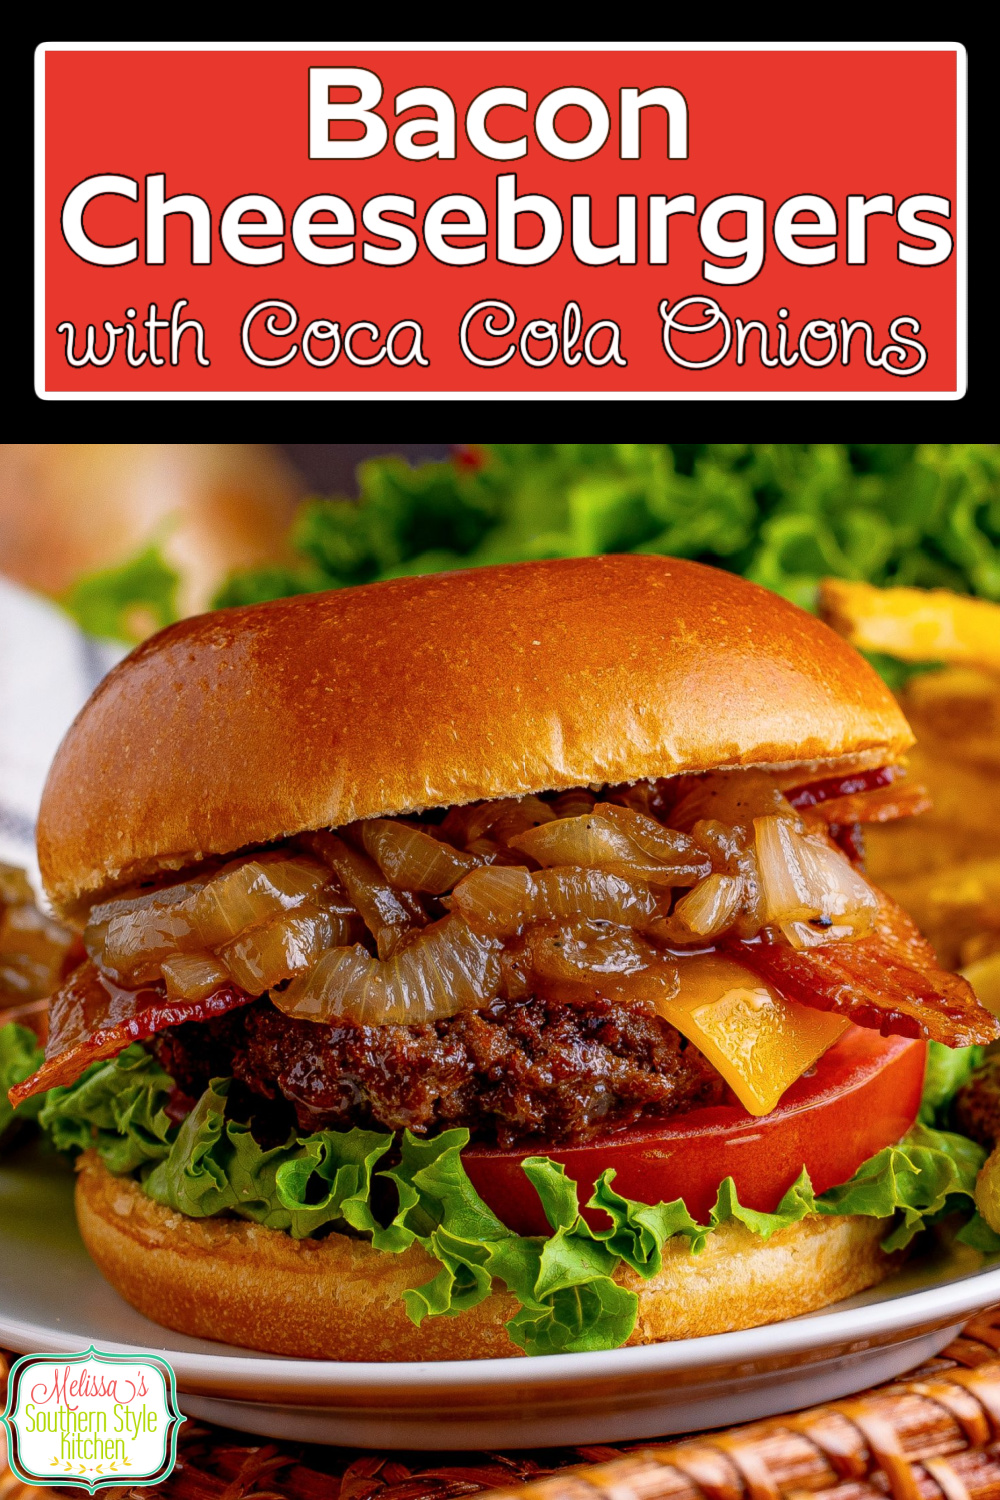 These big and juicy Bacon Cheeseburgers with Coca Cola Onions will bring the family running to the table every time. #cheeseburgers #cocacola #baconcheeseburgers #easyburgerrecipes #baconcheeseburgerrecipe #caramelizedonions #cocacolaonions